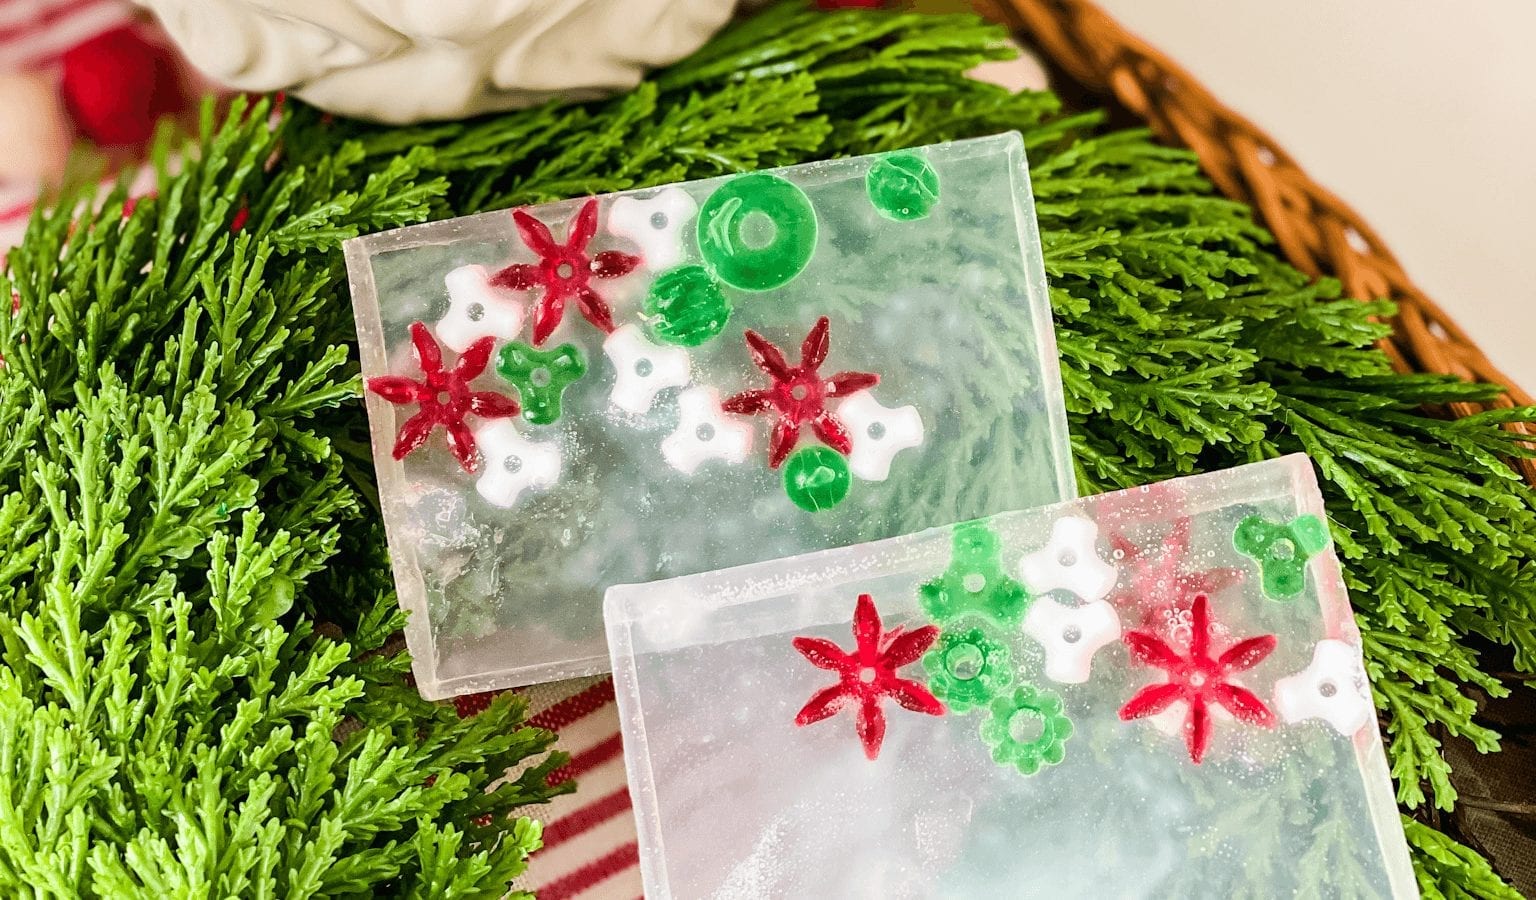 Homemade Christmas soaps that kids can make and gift!